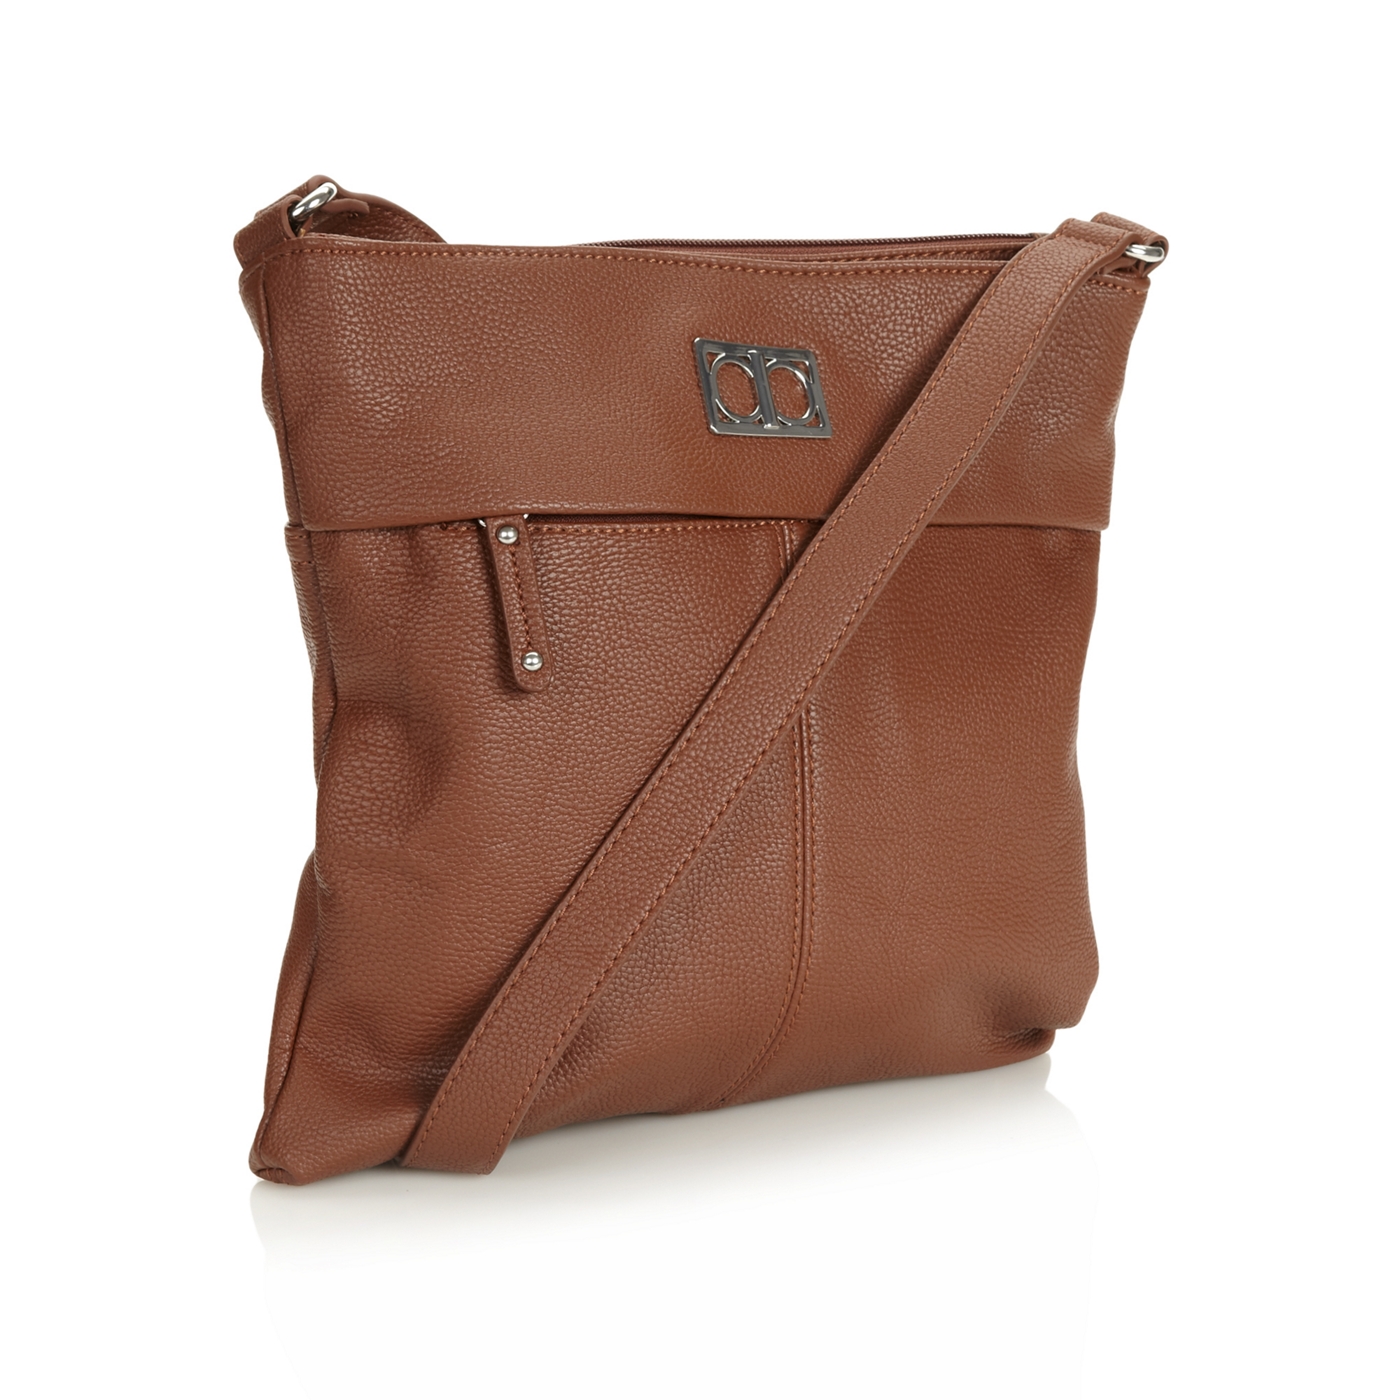 The Collection Tan cuff cross body bag